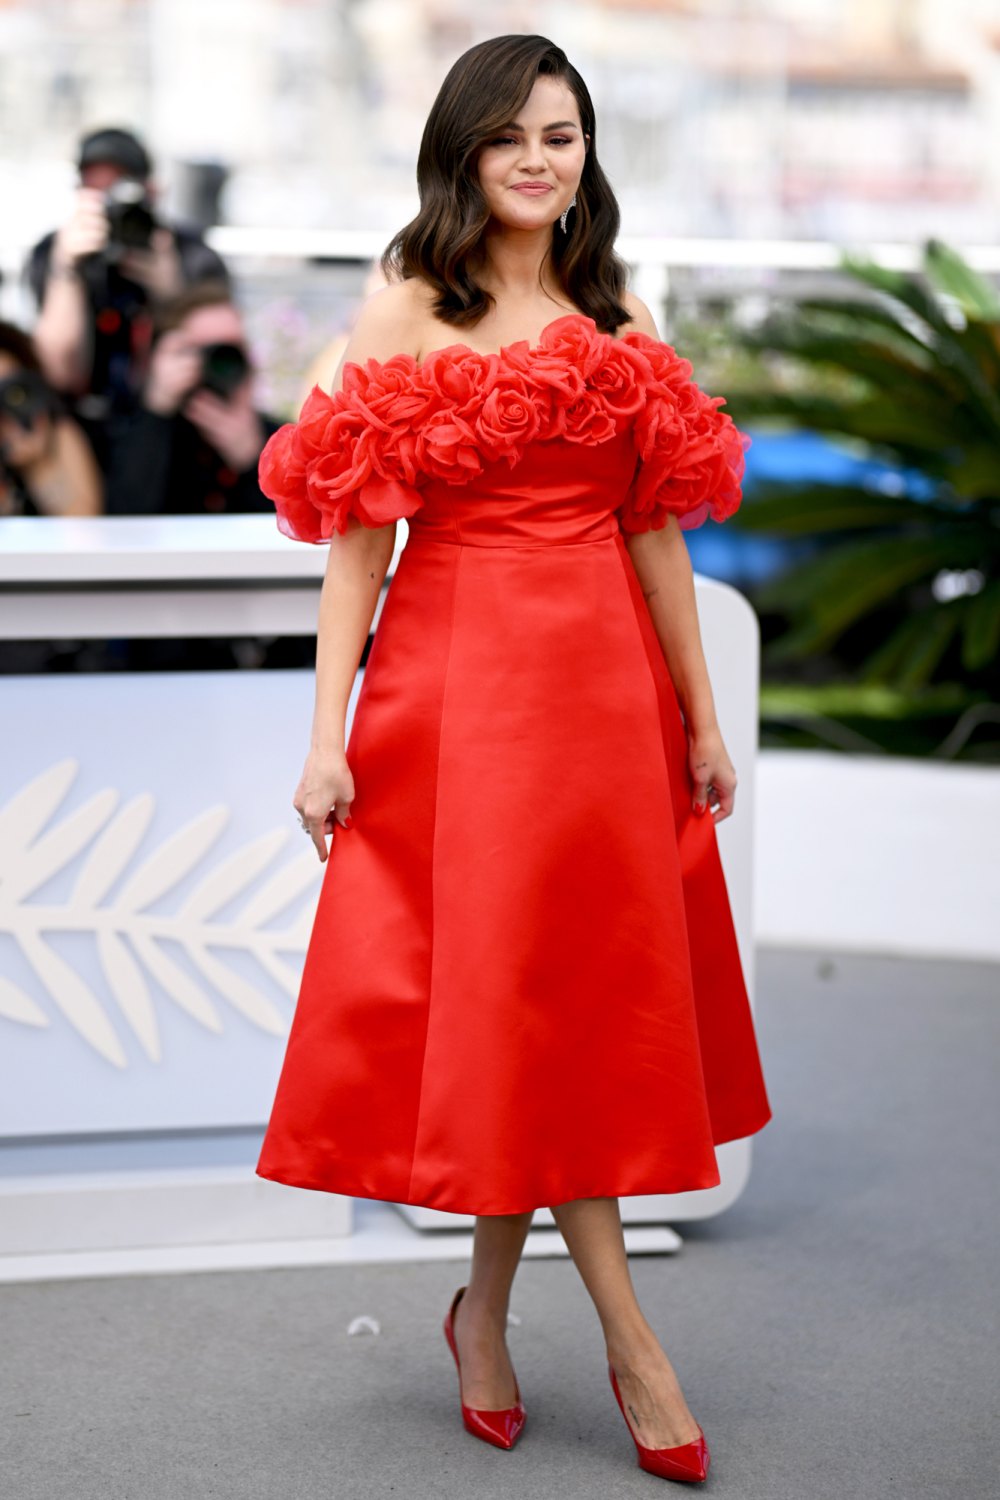 Selena Gomez Adds a Pop of Color at the Cannes Film Festival